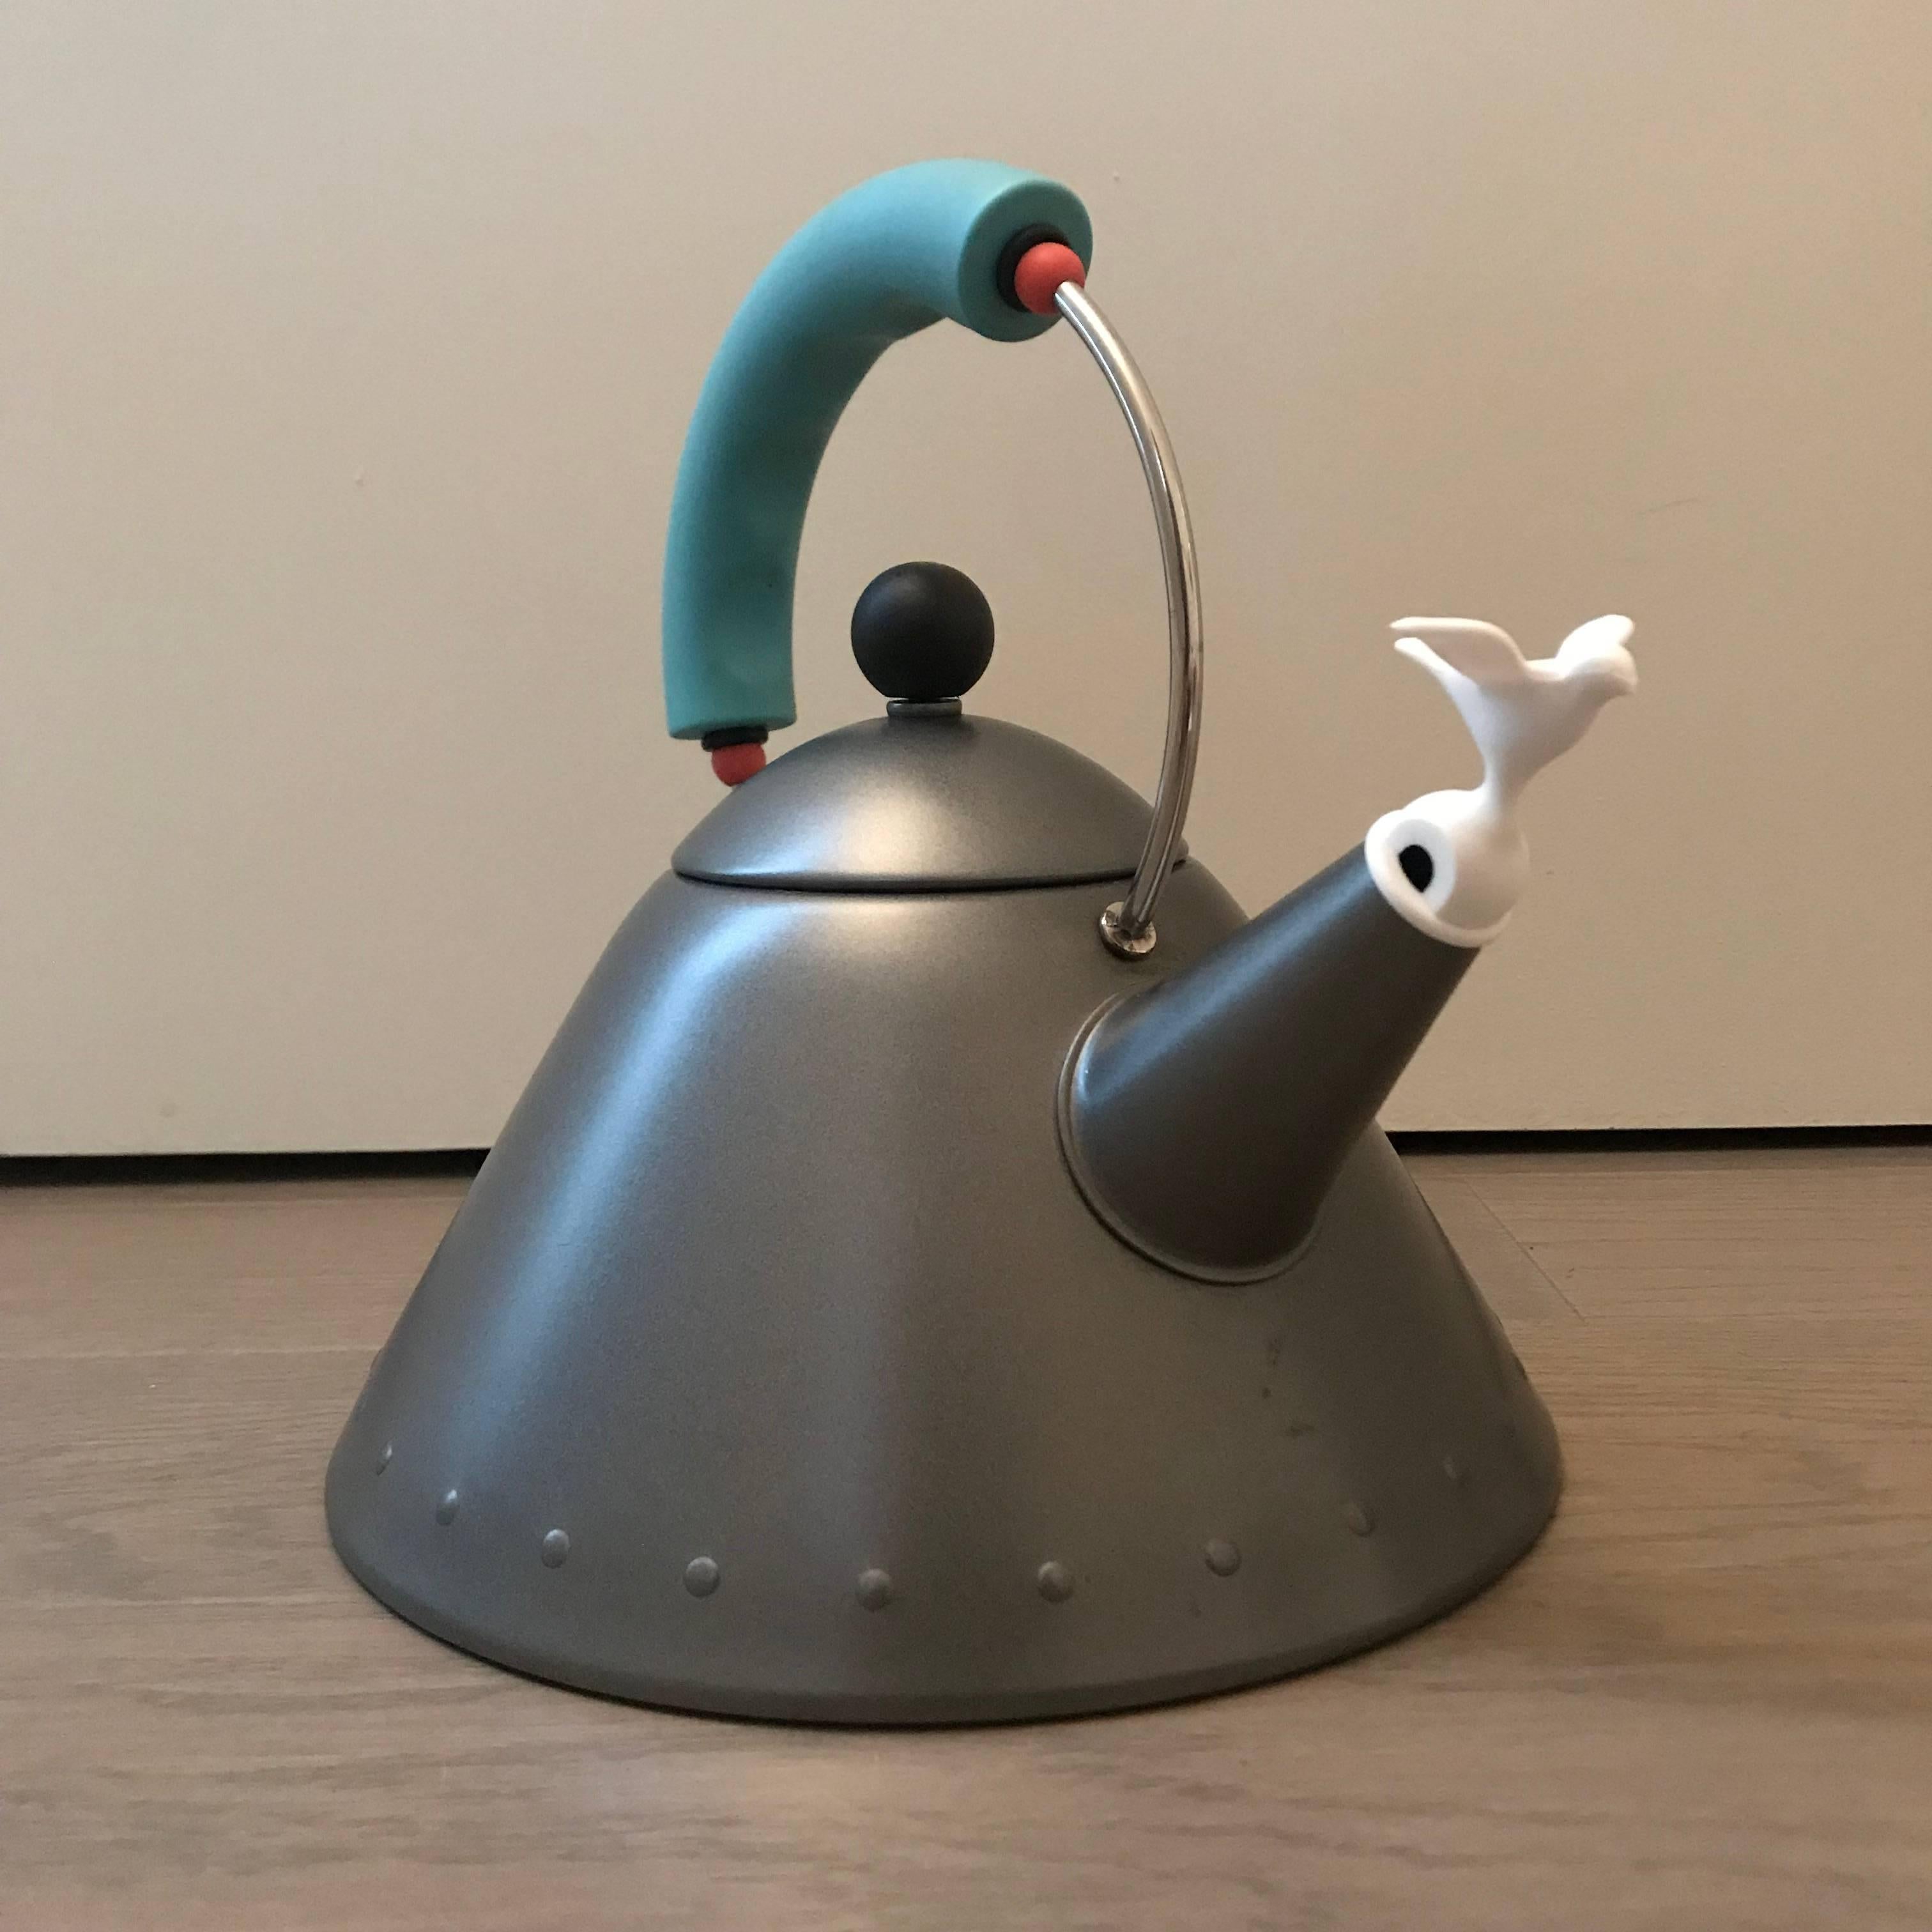 Michael Graves Postmodern tea kettle for Alessi rendered in rare matte platinum grey enamel body, black knob, white whistle bird and turquoise handle with red appointments.